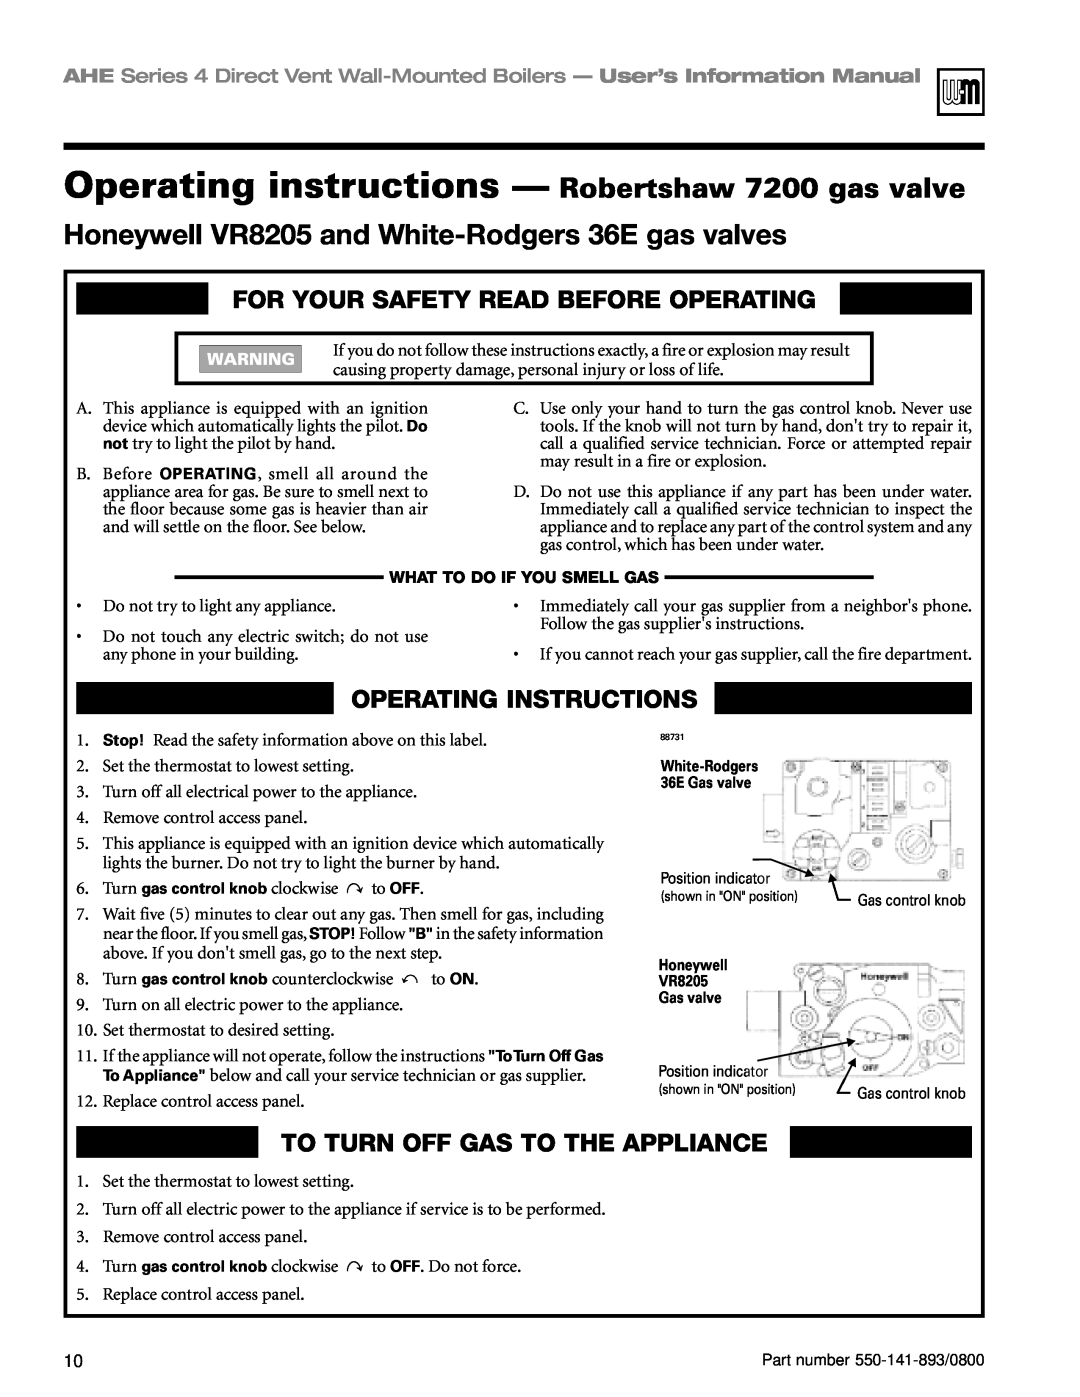 Honeywell Series 4 Operating instructions - Robertshaw 7200 gas valve, Honeywell VR8205 and White-Rodgers 36E gas valves 